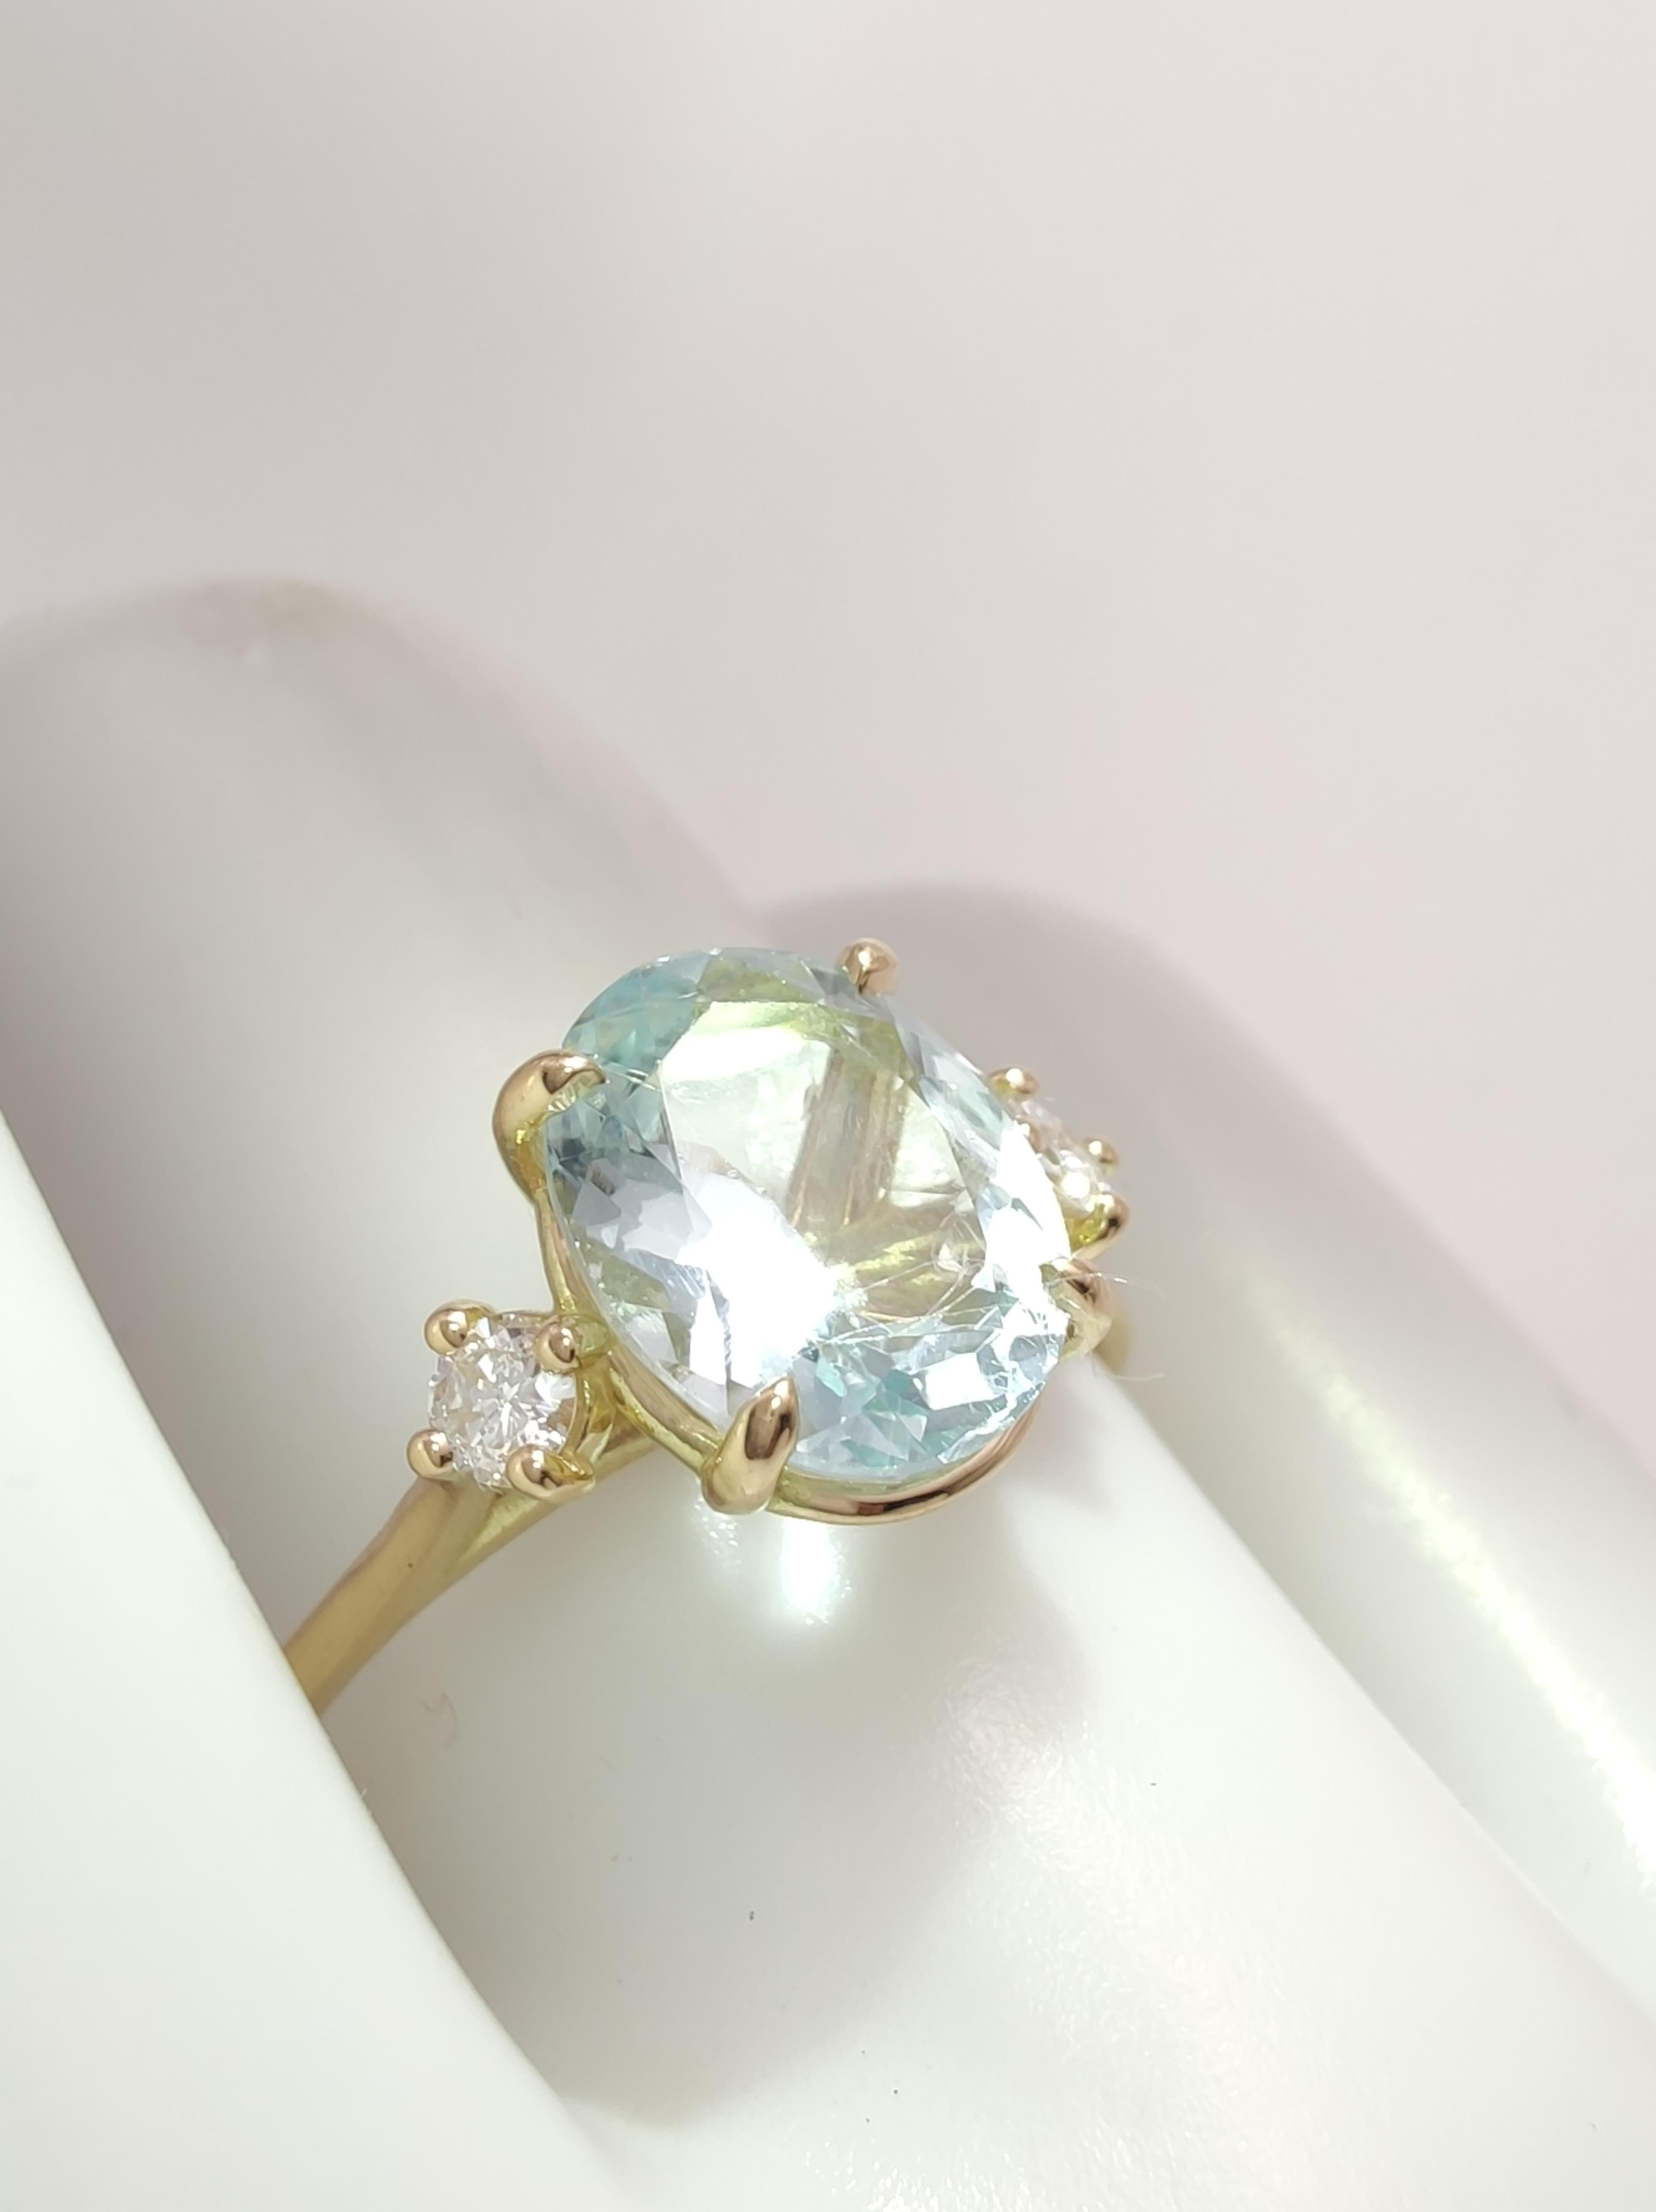 Handcrafted Elegance: Exquisite 18K Gold Ring Featuring Stunning Gemstones

Elevate your style with our handcrafted 18K gold ring for women, showcasing a timeless design with a central 1.6ct oval cut aquamarine and two 0.13ct diamonds. Discover